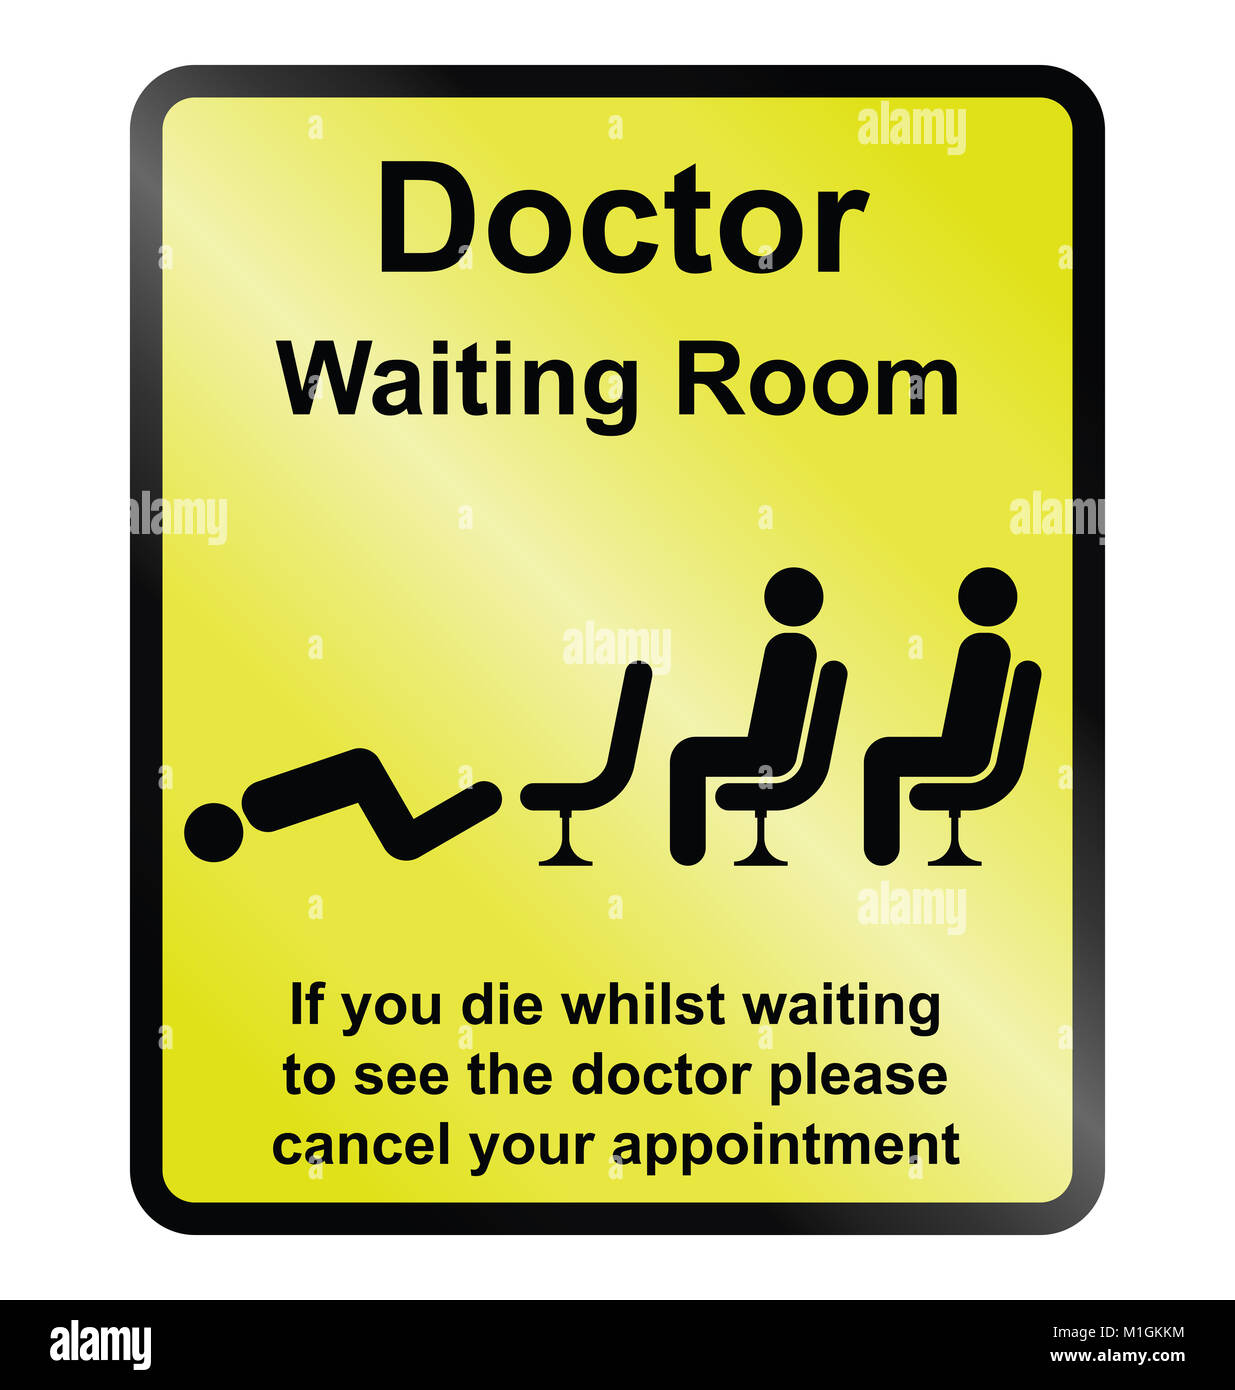 Comical doctors waiting room public information sign isolated on yellow background Stock Photo